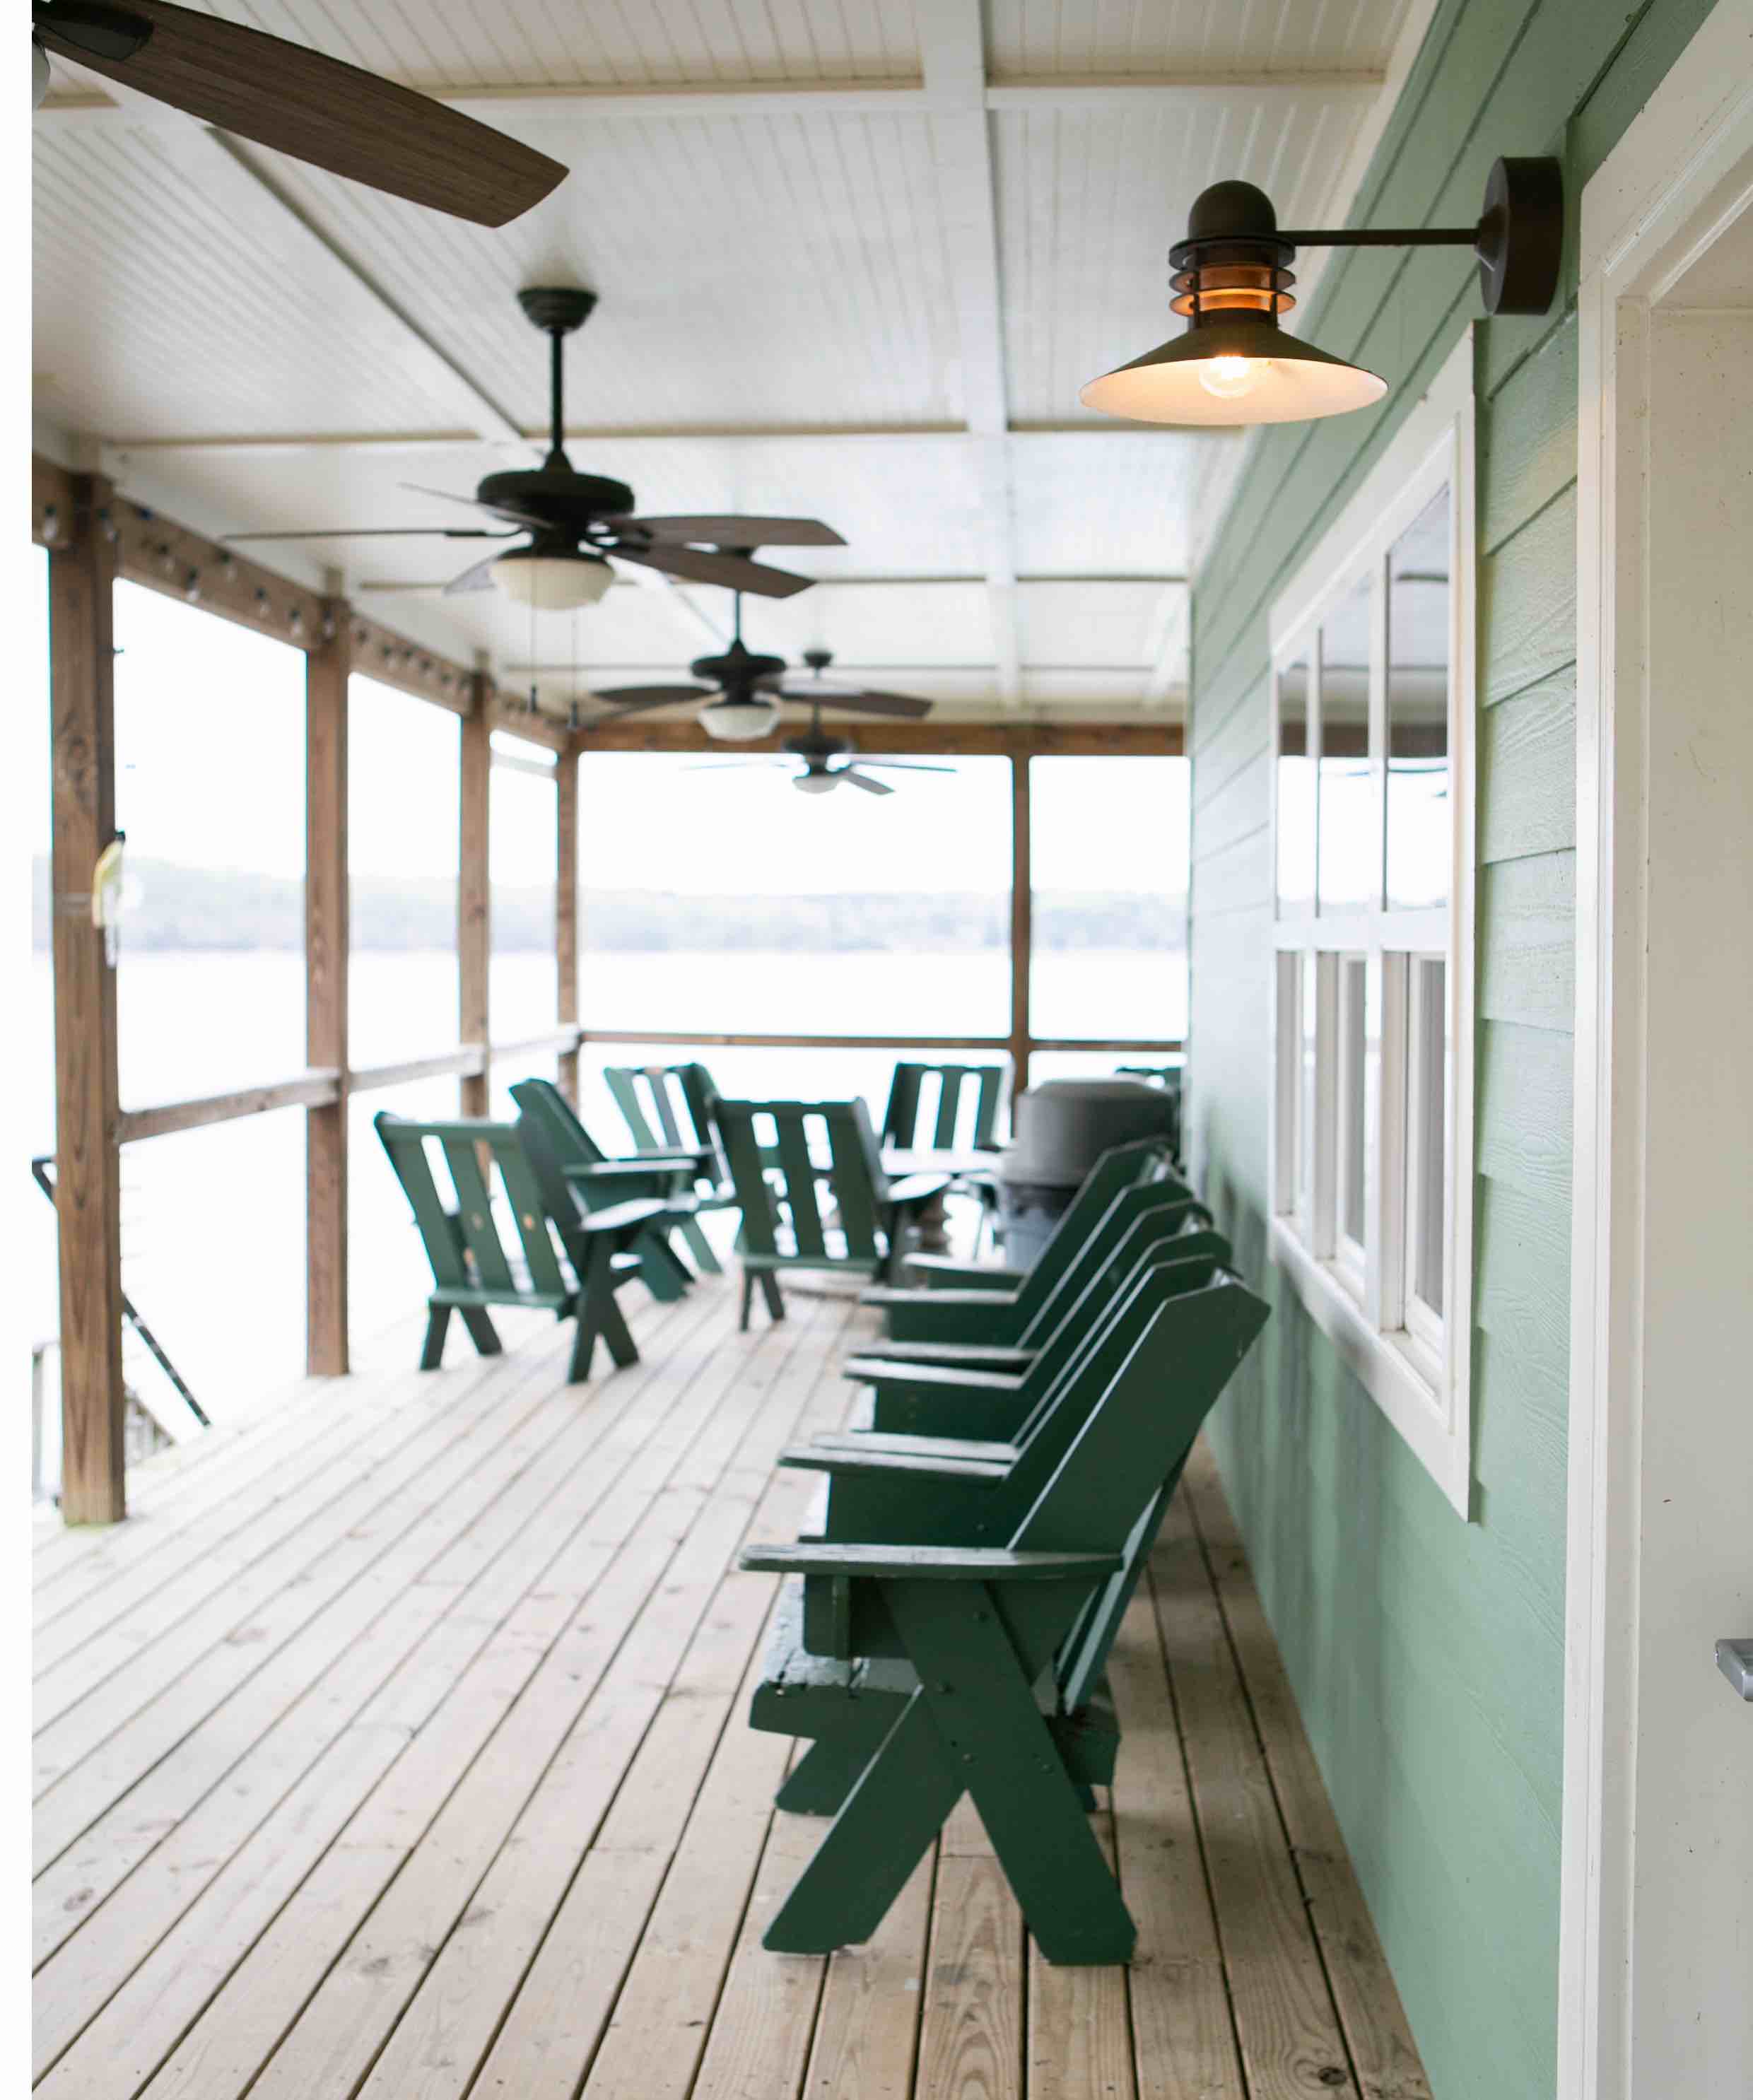 Custom Electrical can help with outdoor wiring projects like these outdoor lights and fans on this beachy deck.